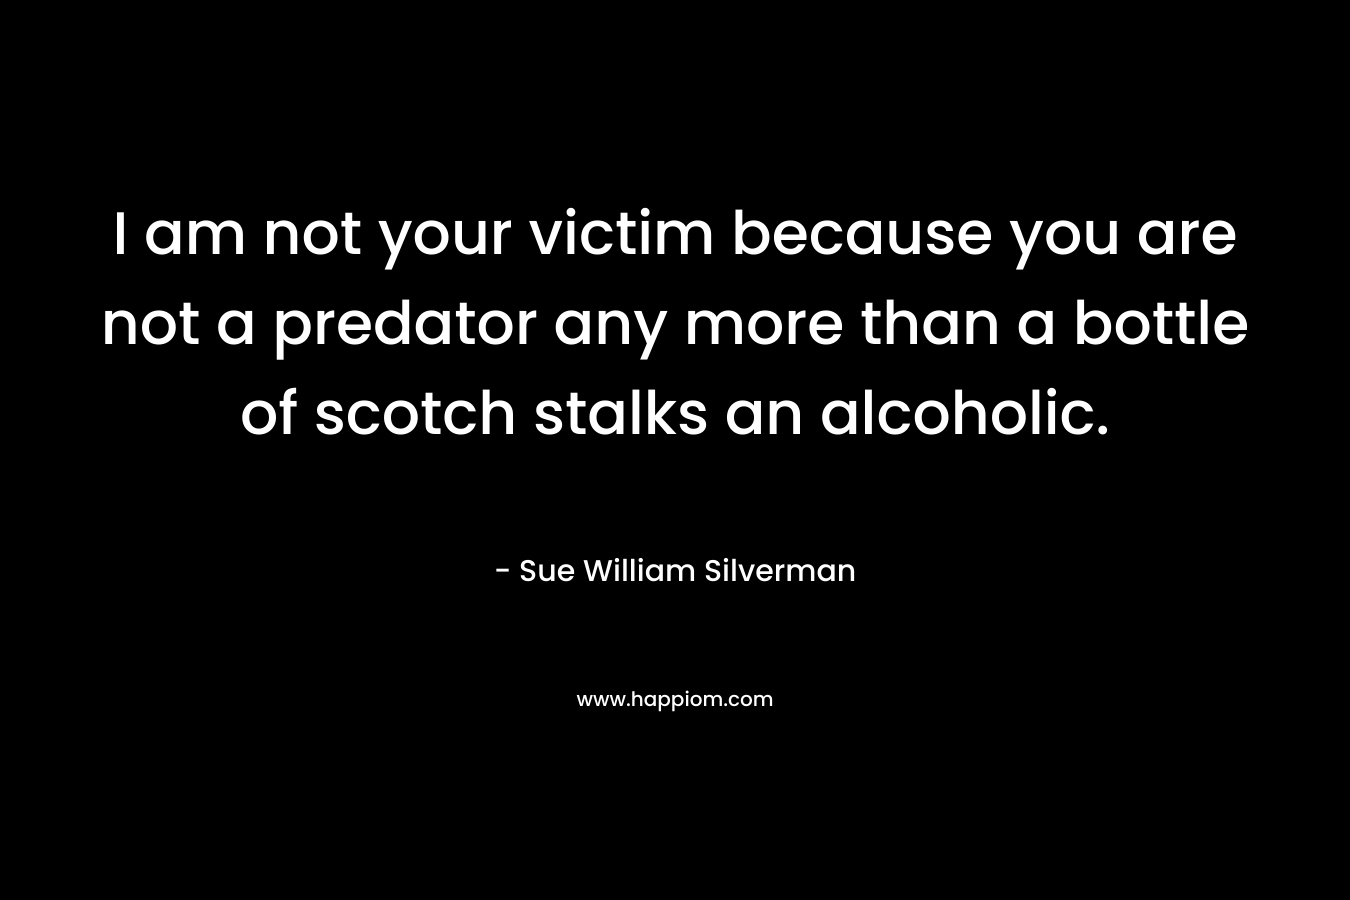 I am not your victim because you are not a predator any more than a bottle of scotch stalks an alcoholic. – Sue William Silverman